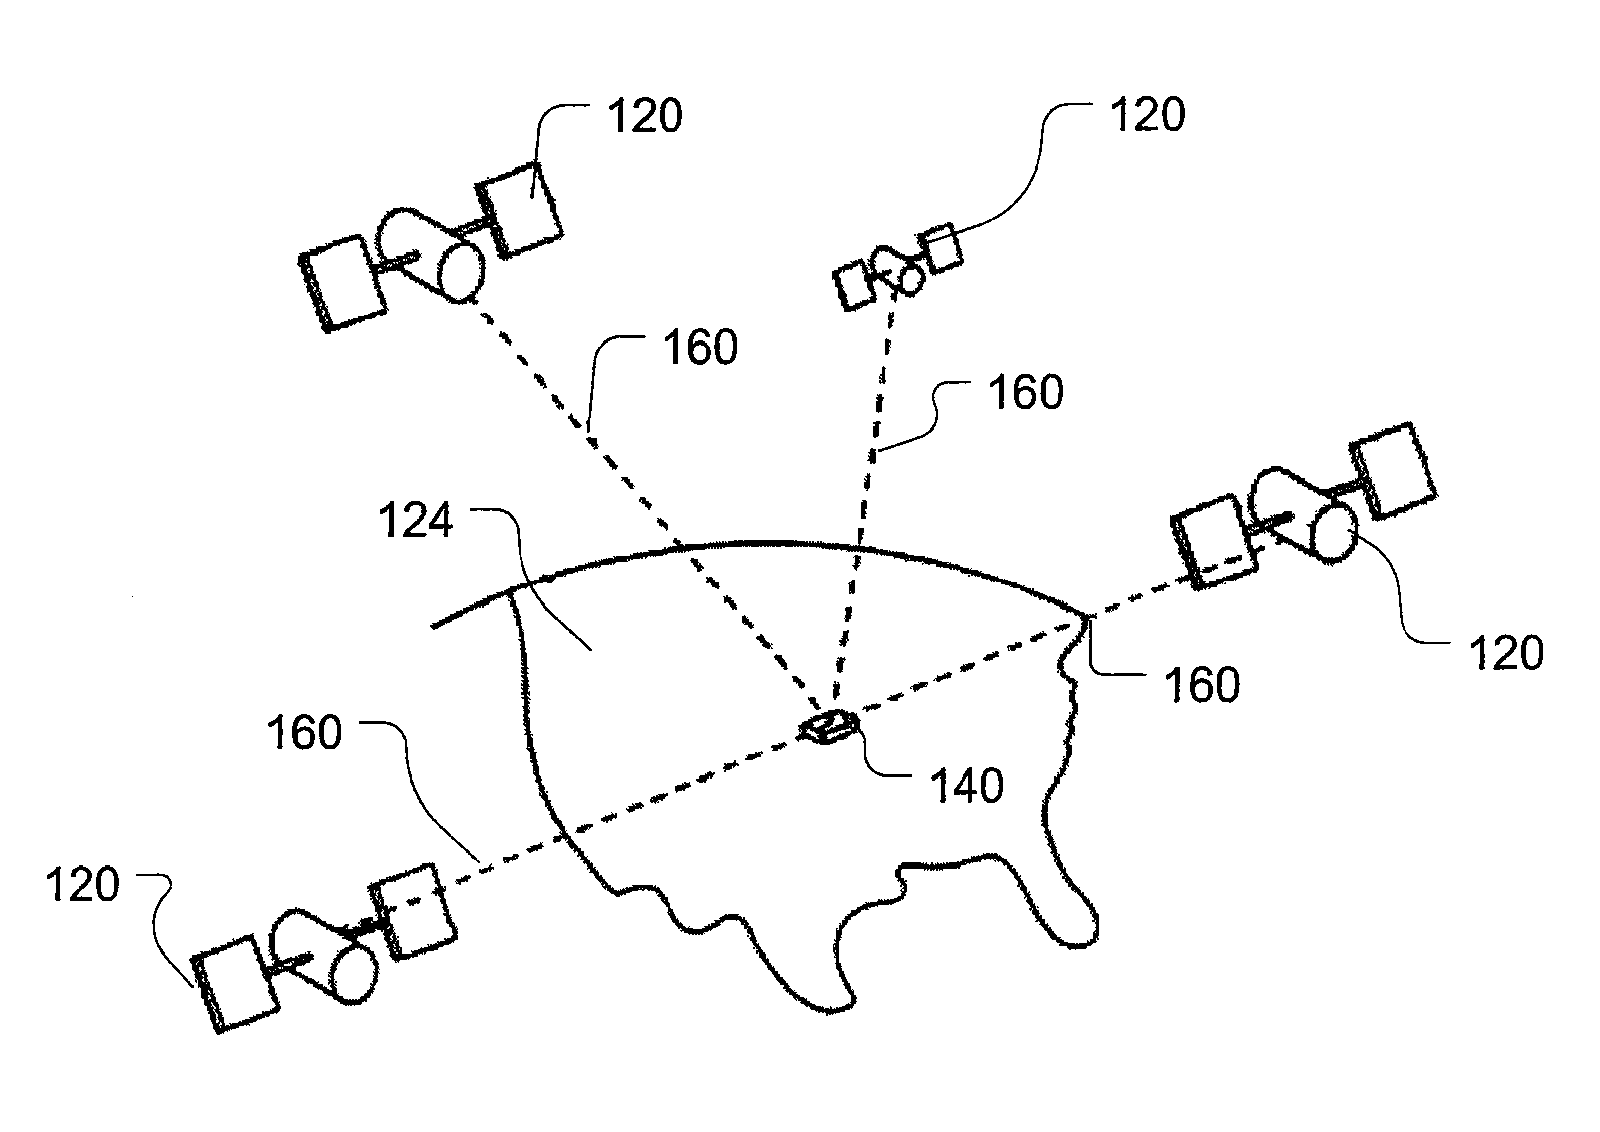 Mobile device that operates differently in different regions